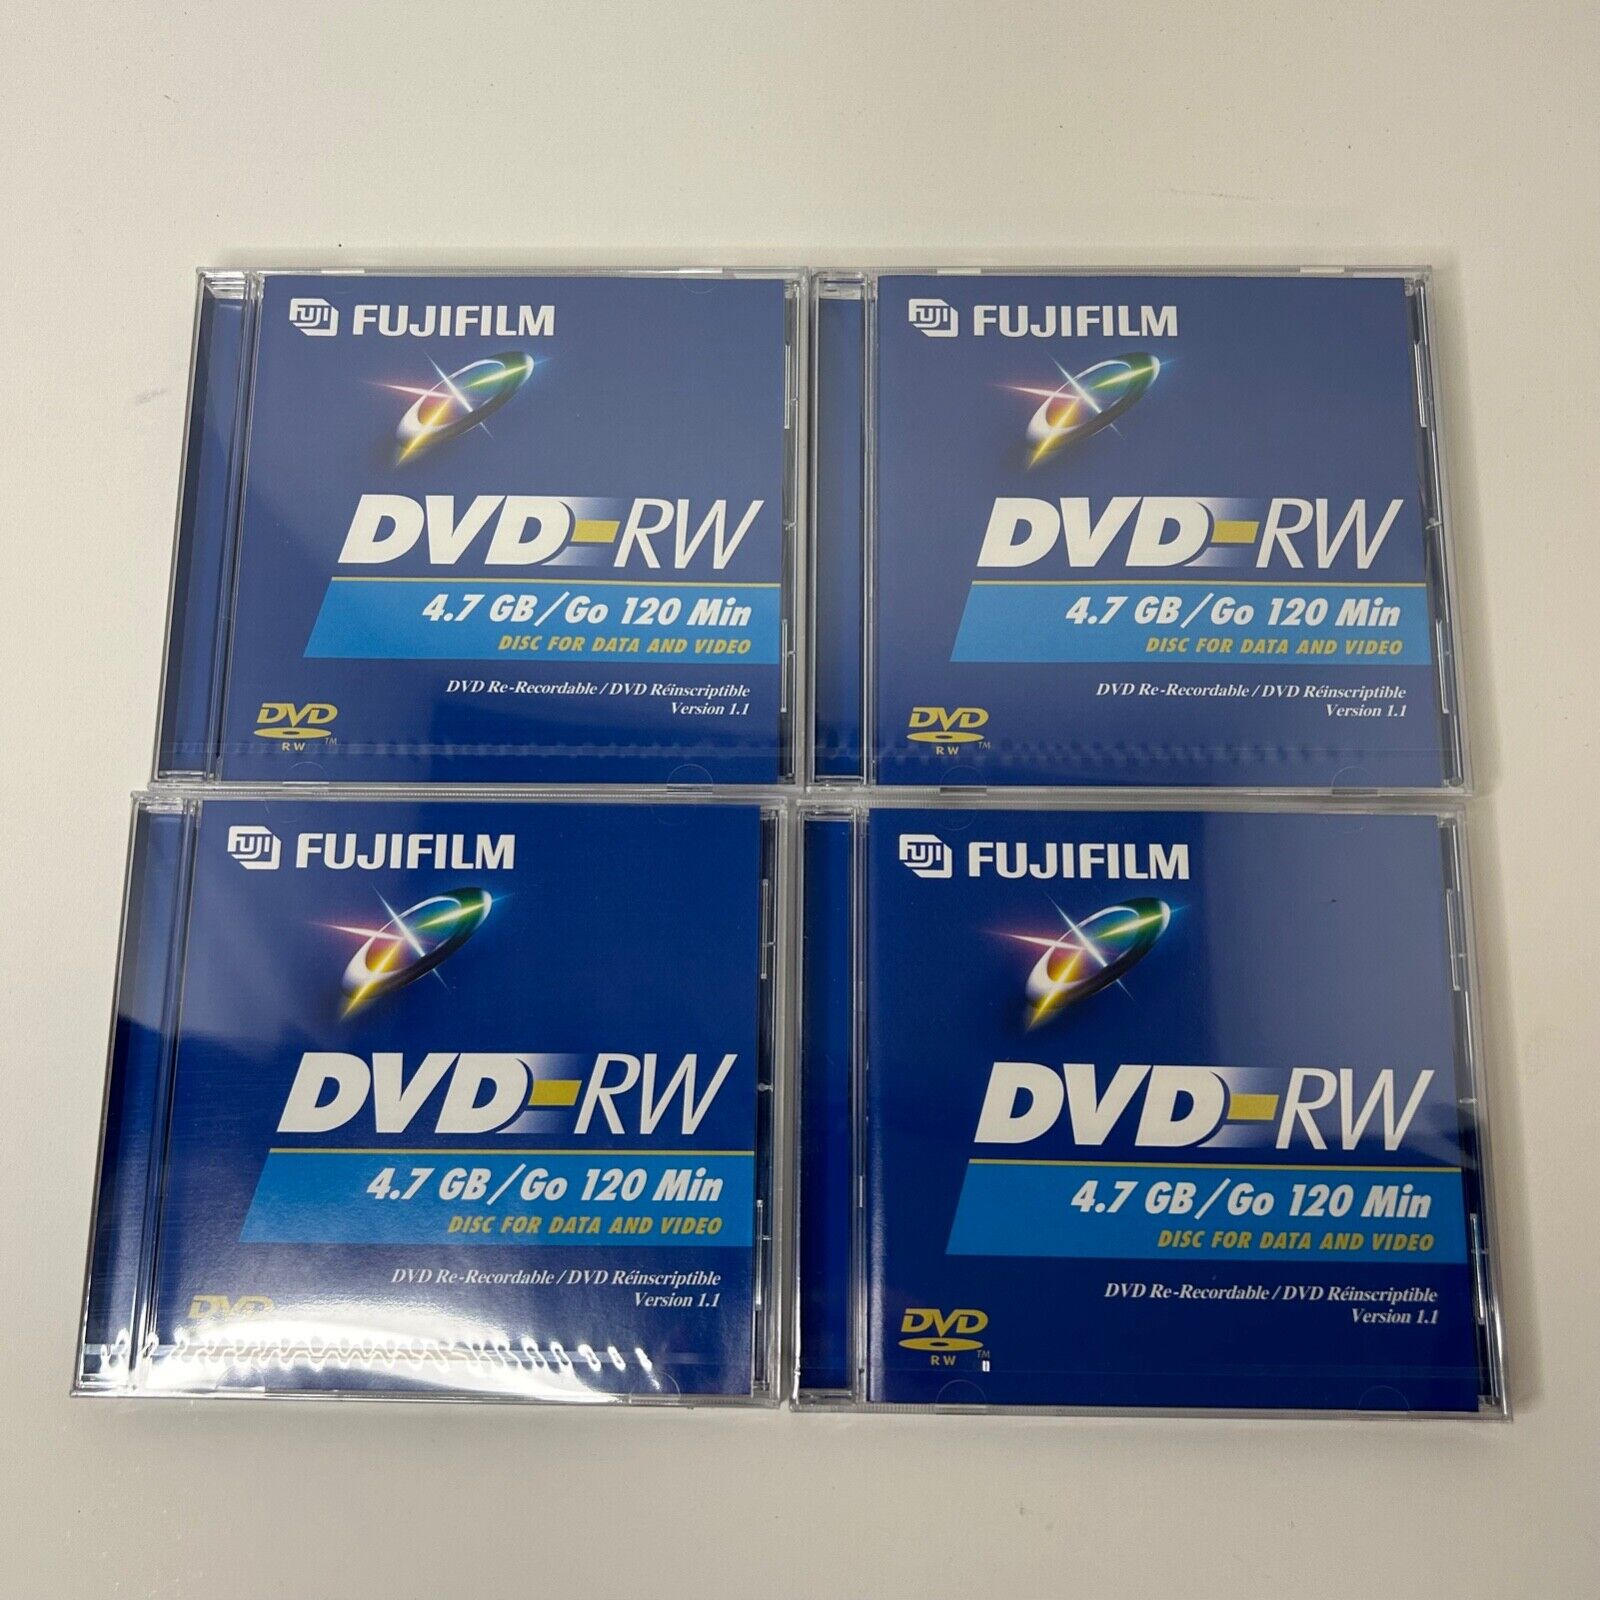 4 DVD-RW FujiFilm 4.7 GB/Go 120 Minutes Re-Recordable Discs For Data And Video